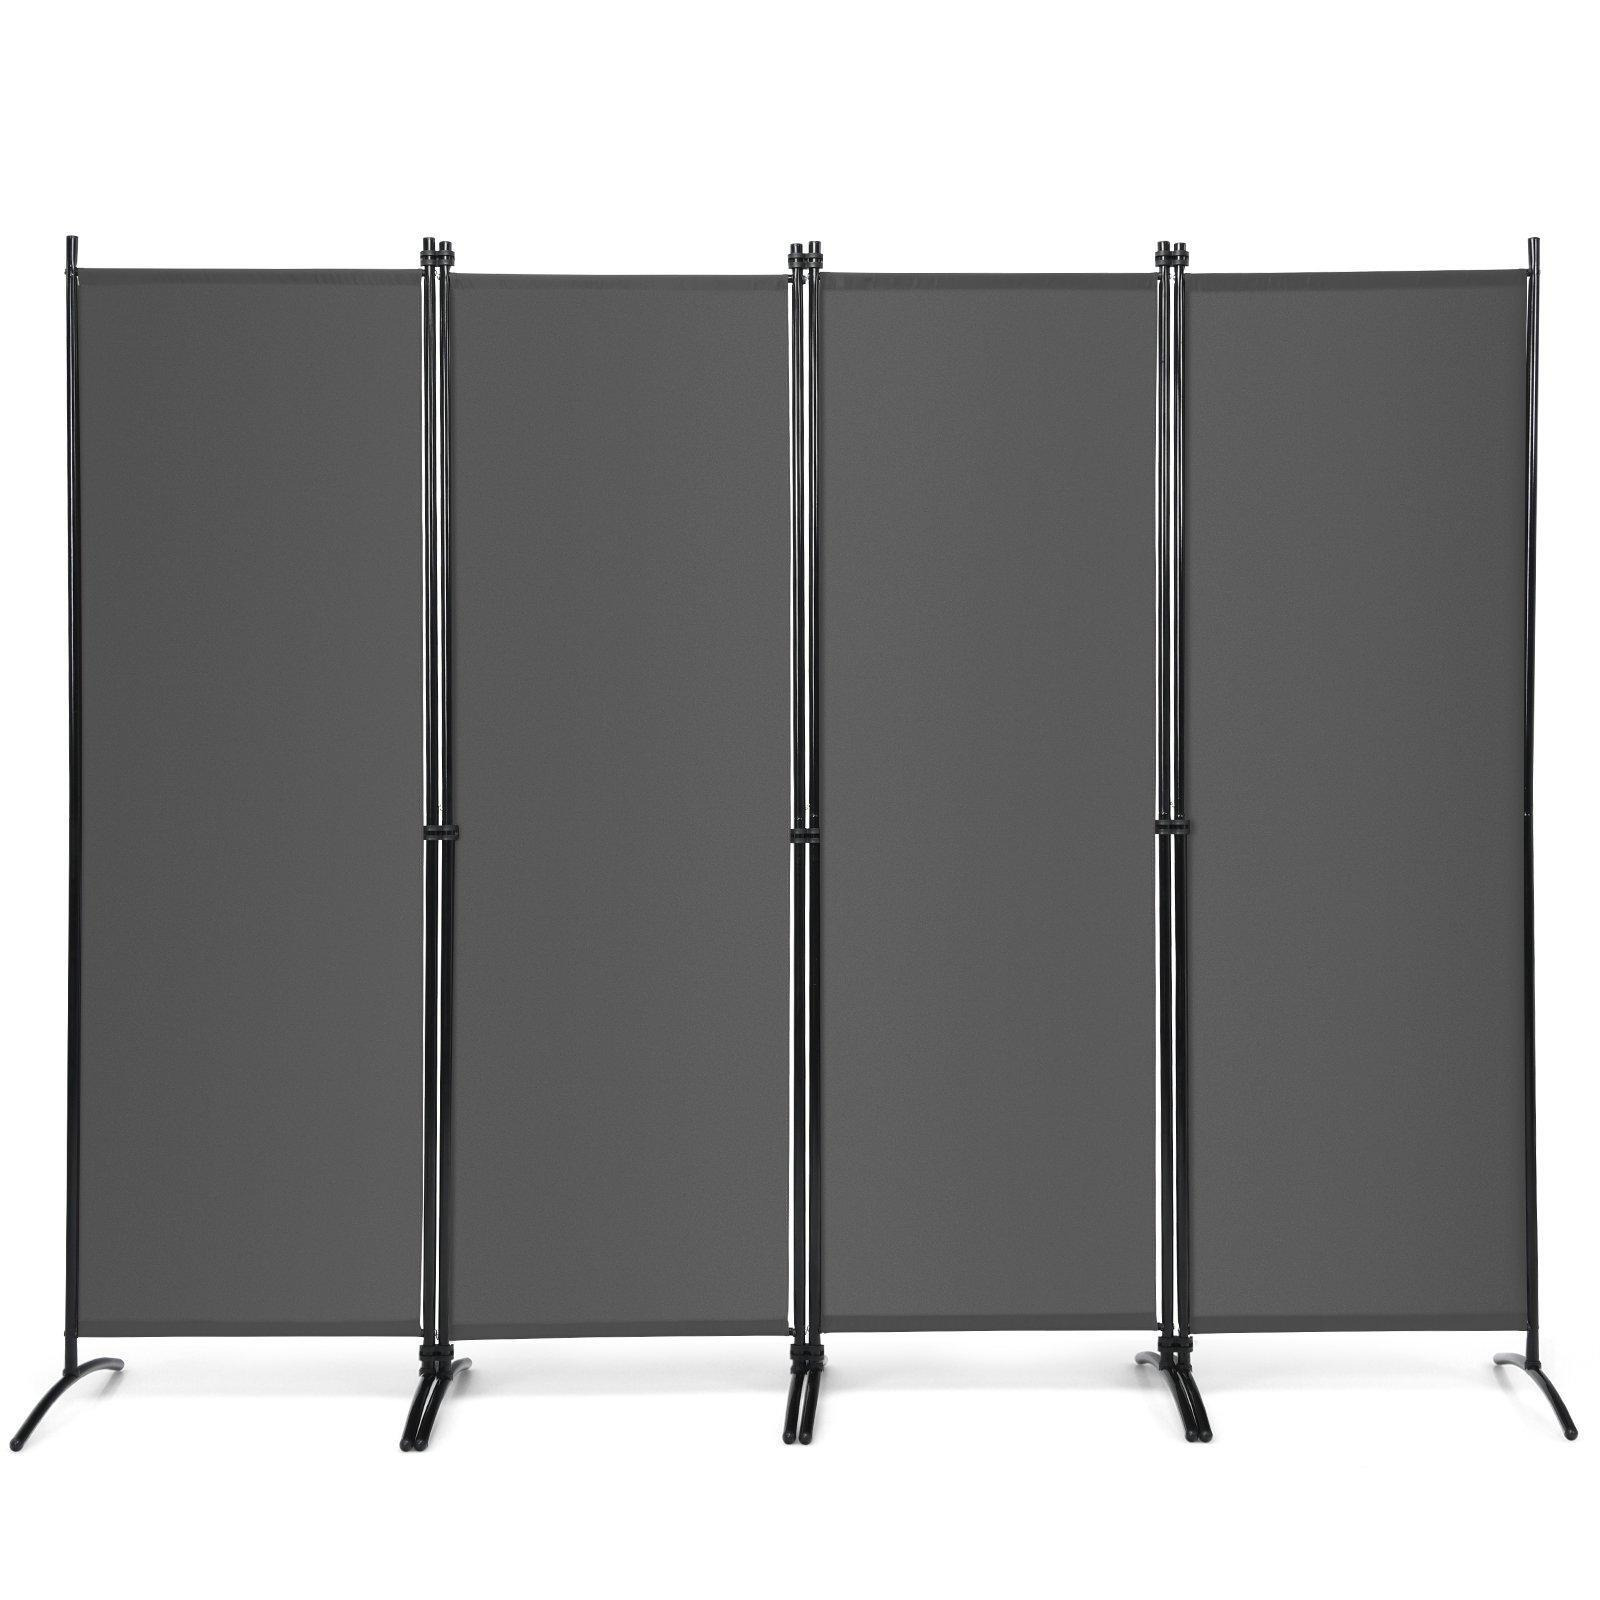 173cm Tall Folding Room Divider Freestanding 4-Panel Privacy Screen - image 1